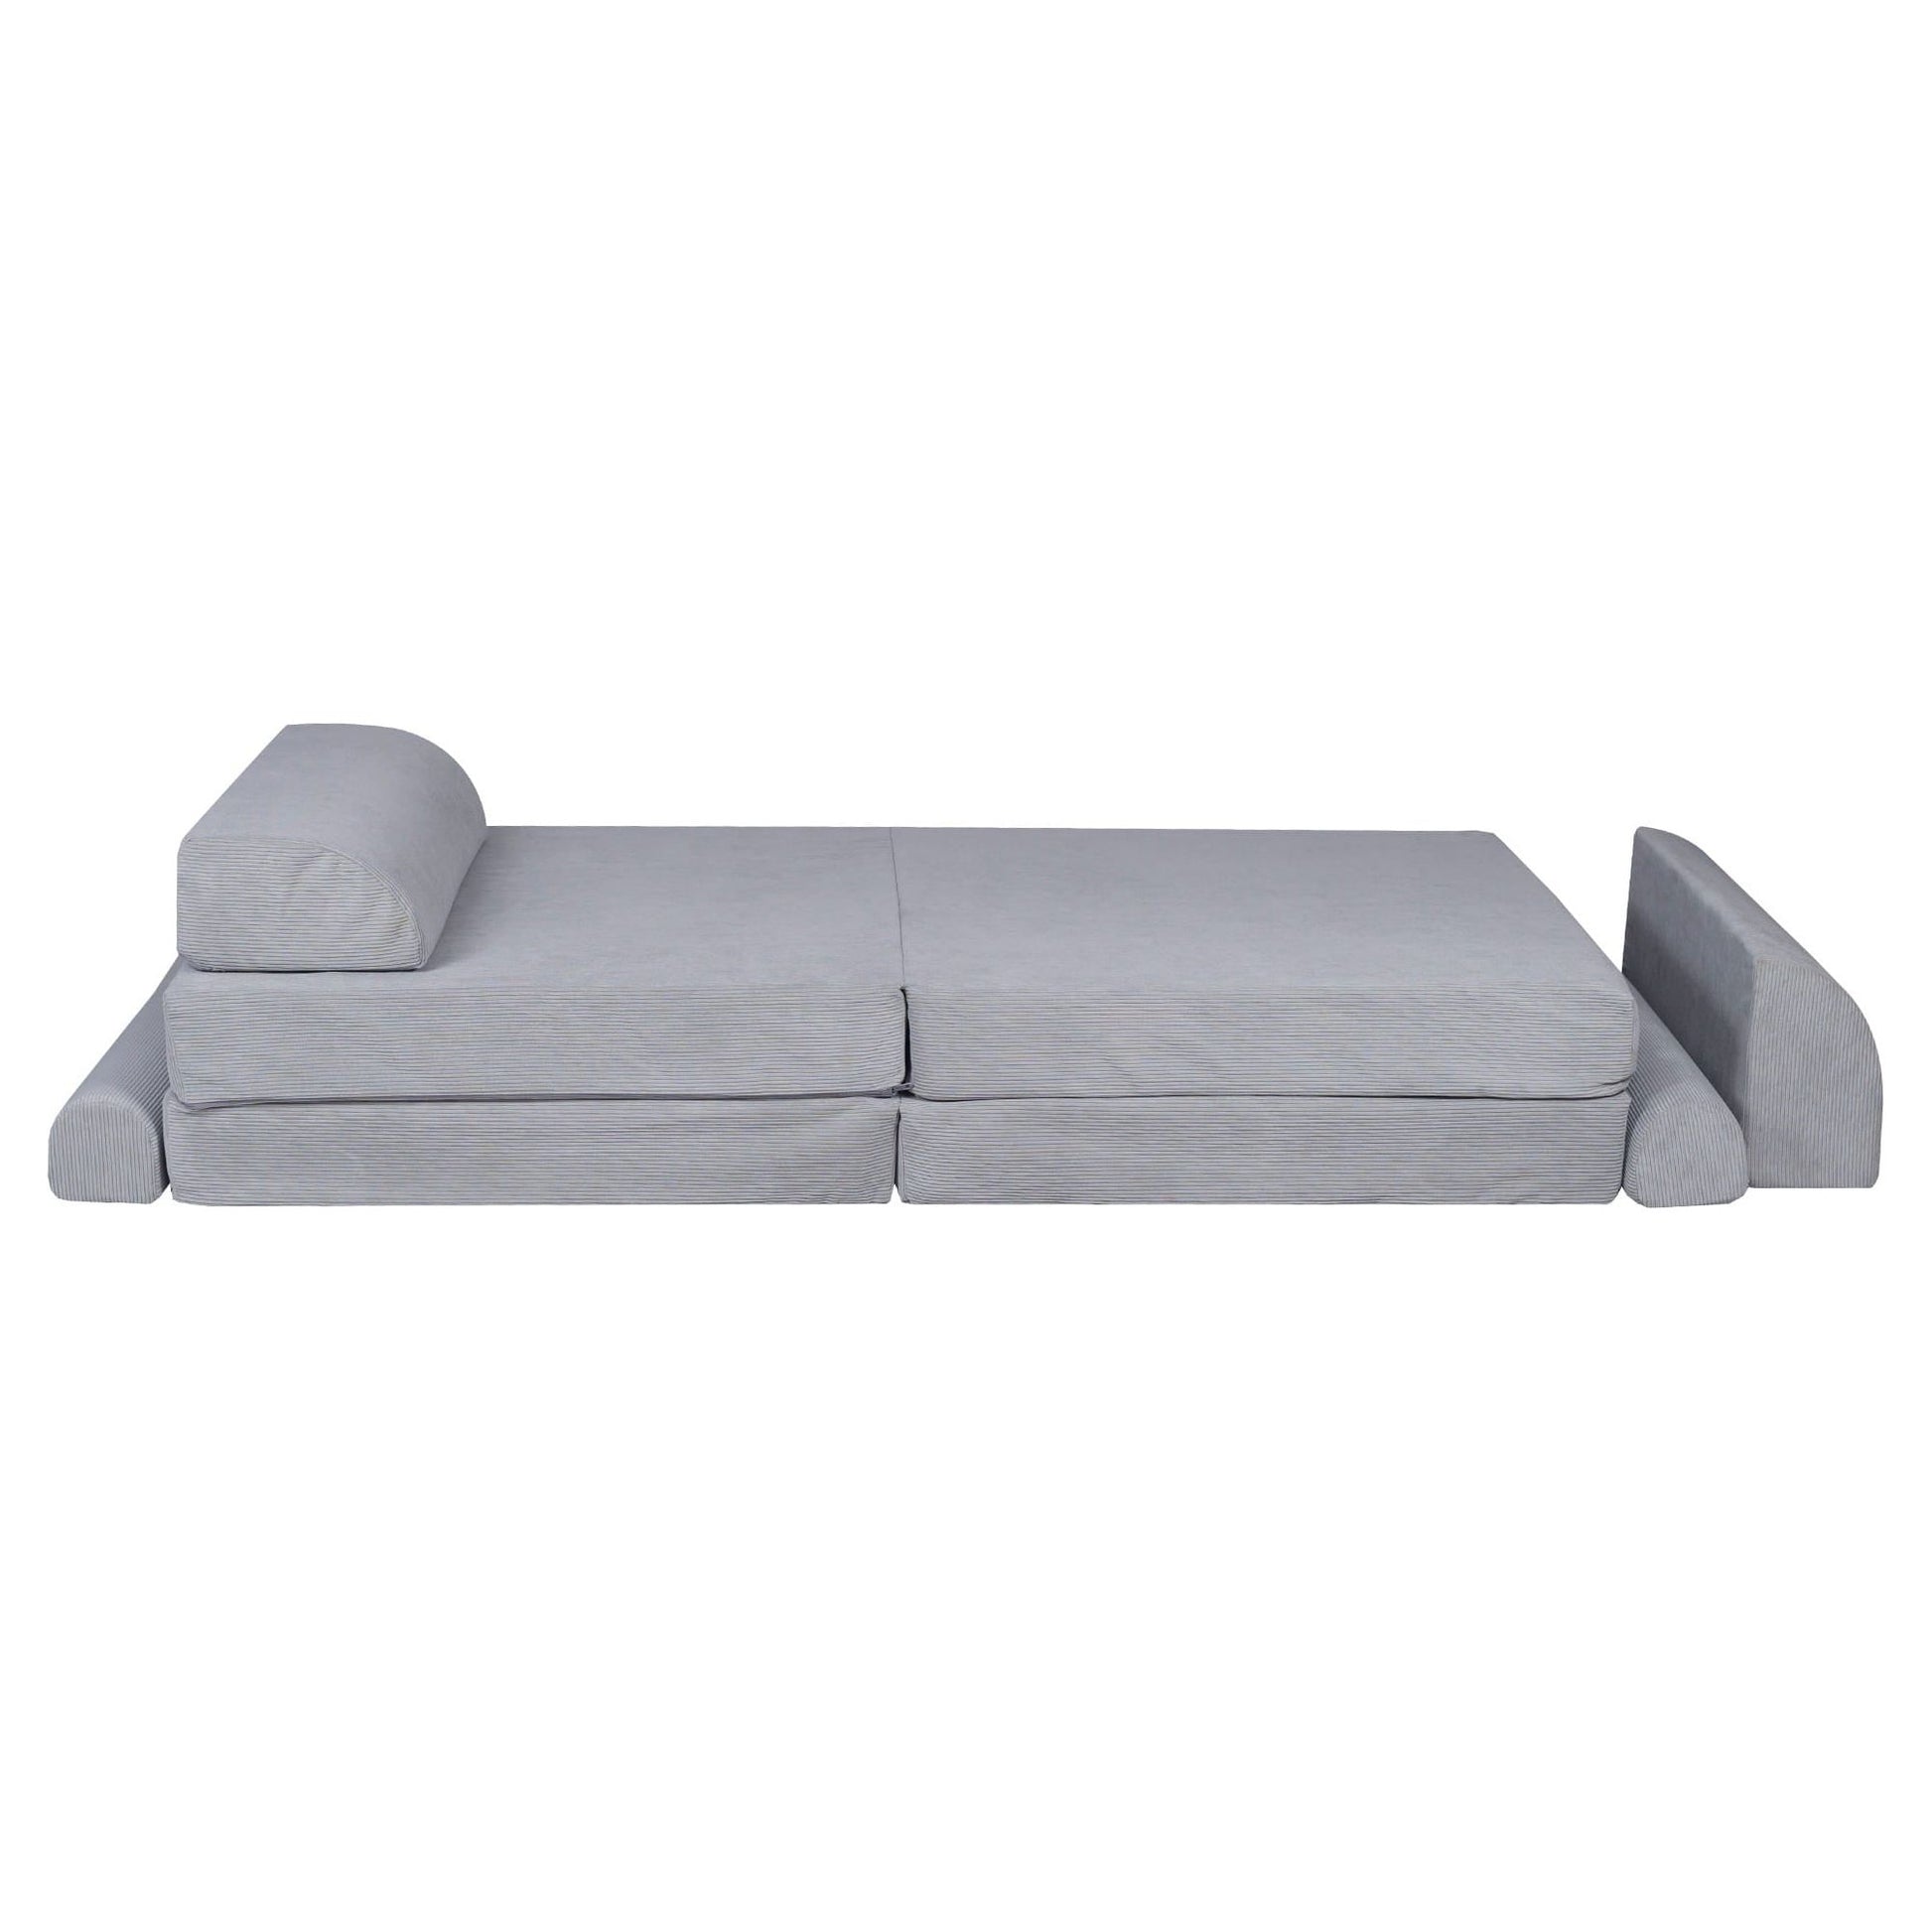 MeowBaby Kids Soft Play Sofa & Fold Out Bed - Corduroy Grey arranged as bed